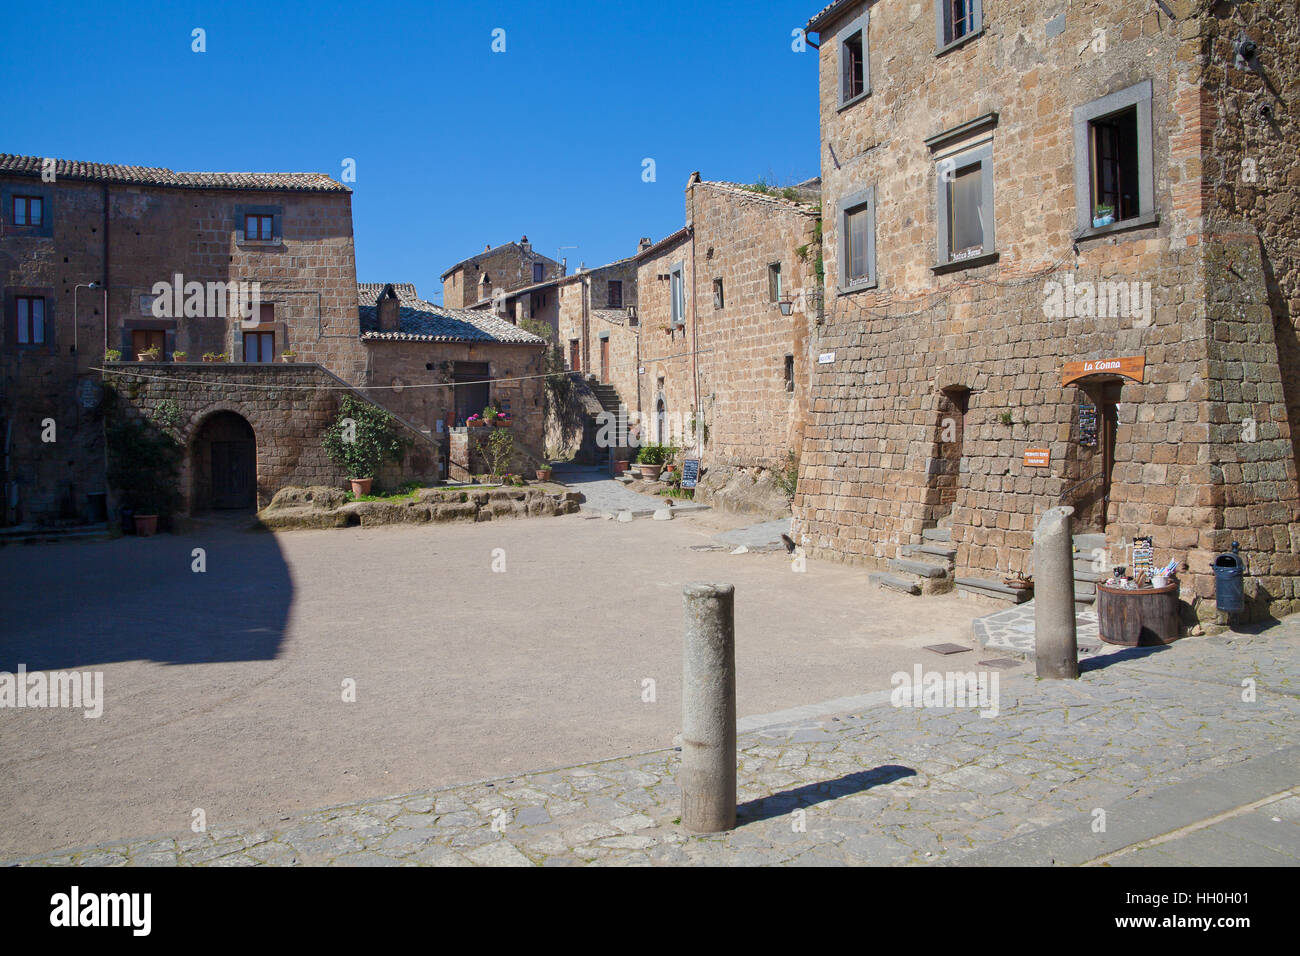 Civita di Bagnoregio, Italy - March 17, 2014: town's main square during the morning. Every building has become a little gastronomy shop, pub or restau Stock Photo